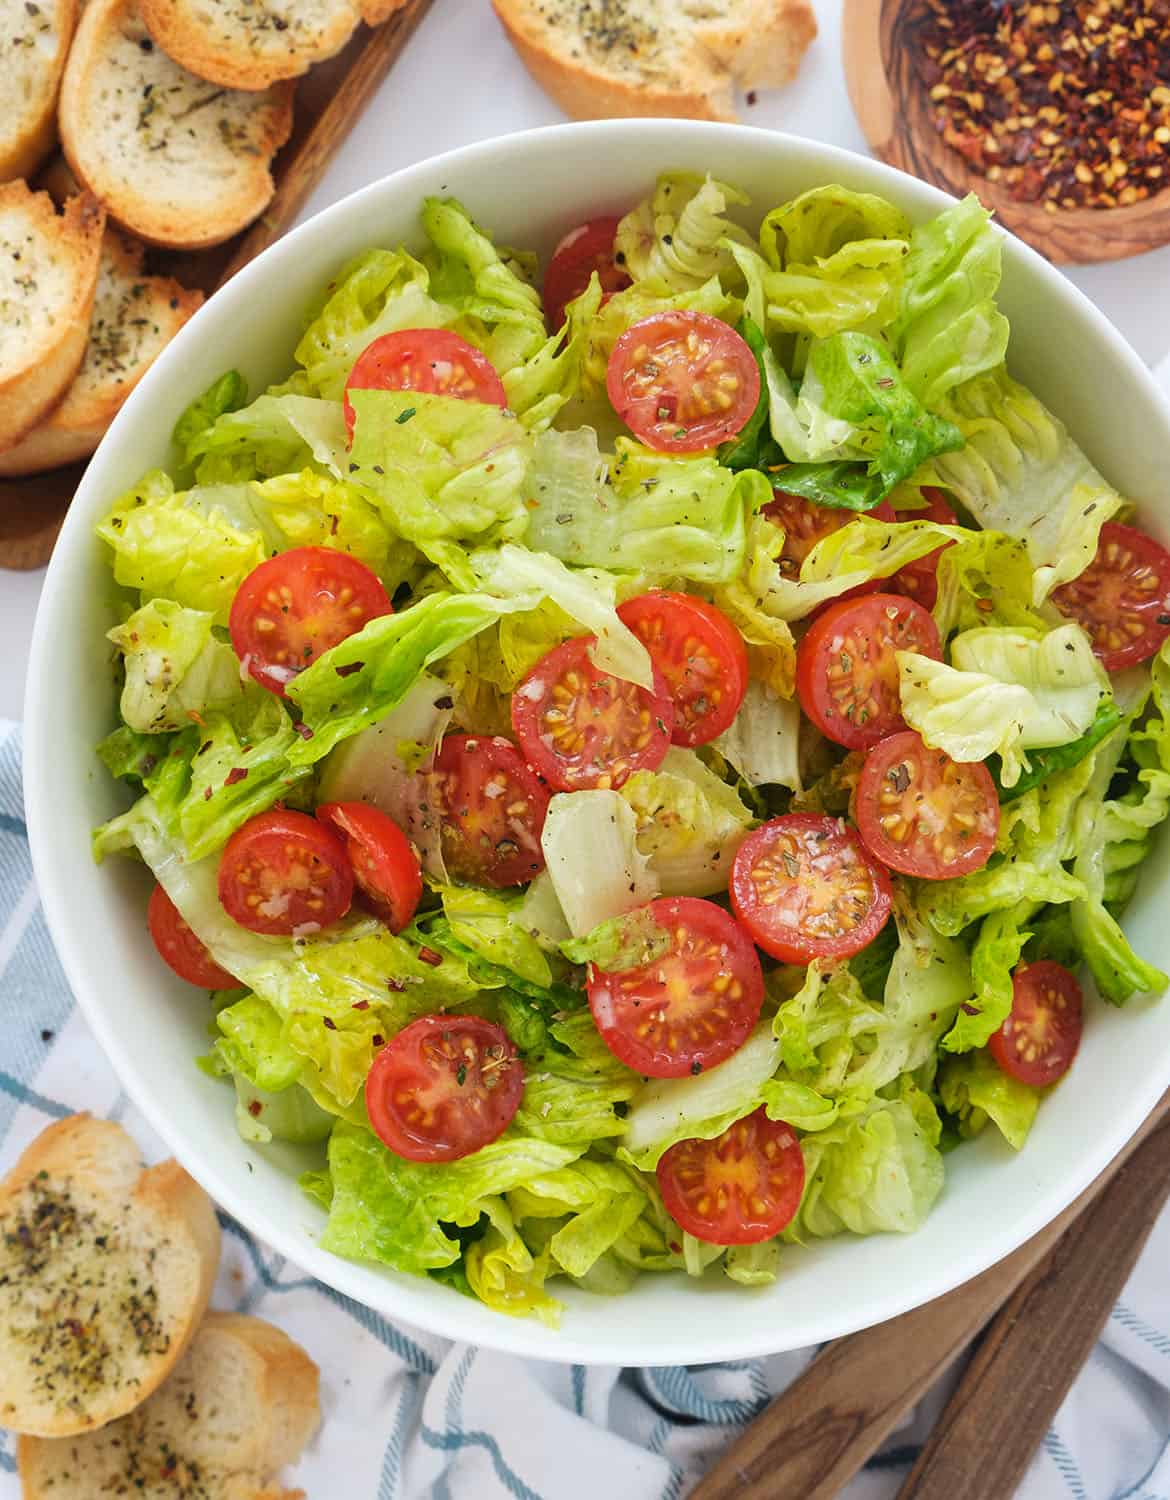 Image of Lettuce and tomatoes